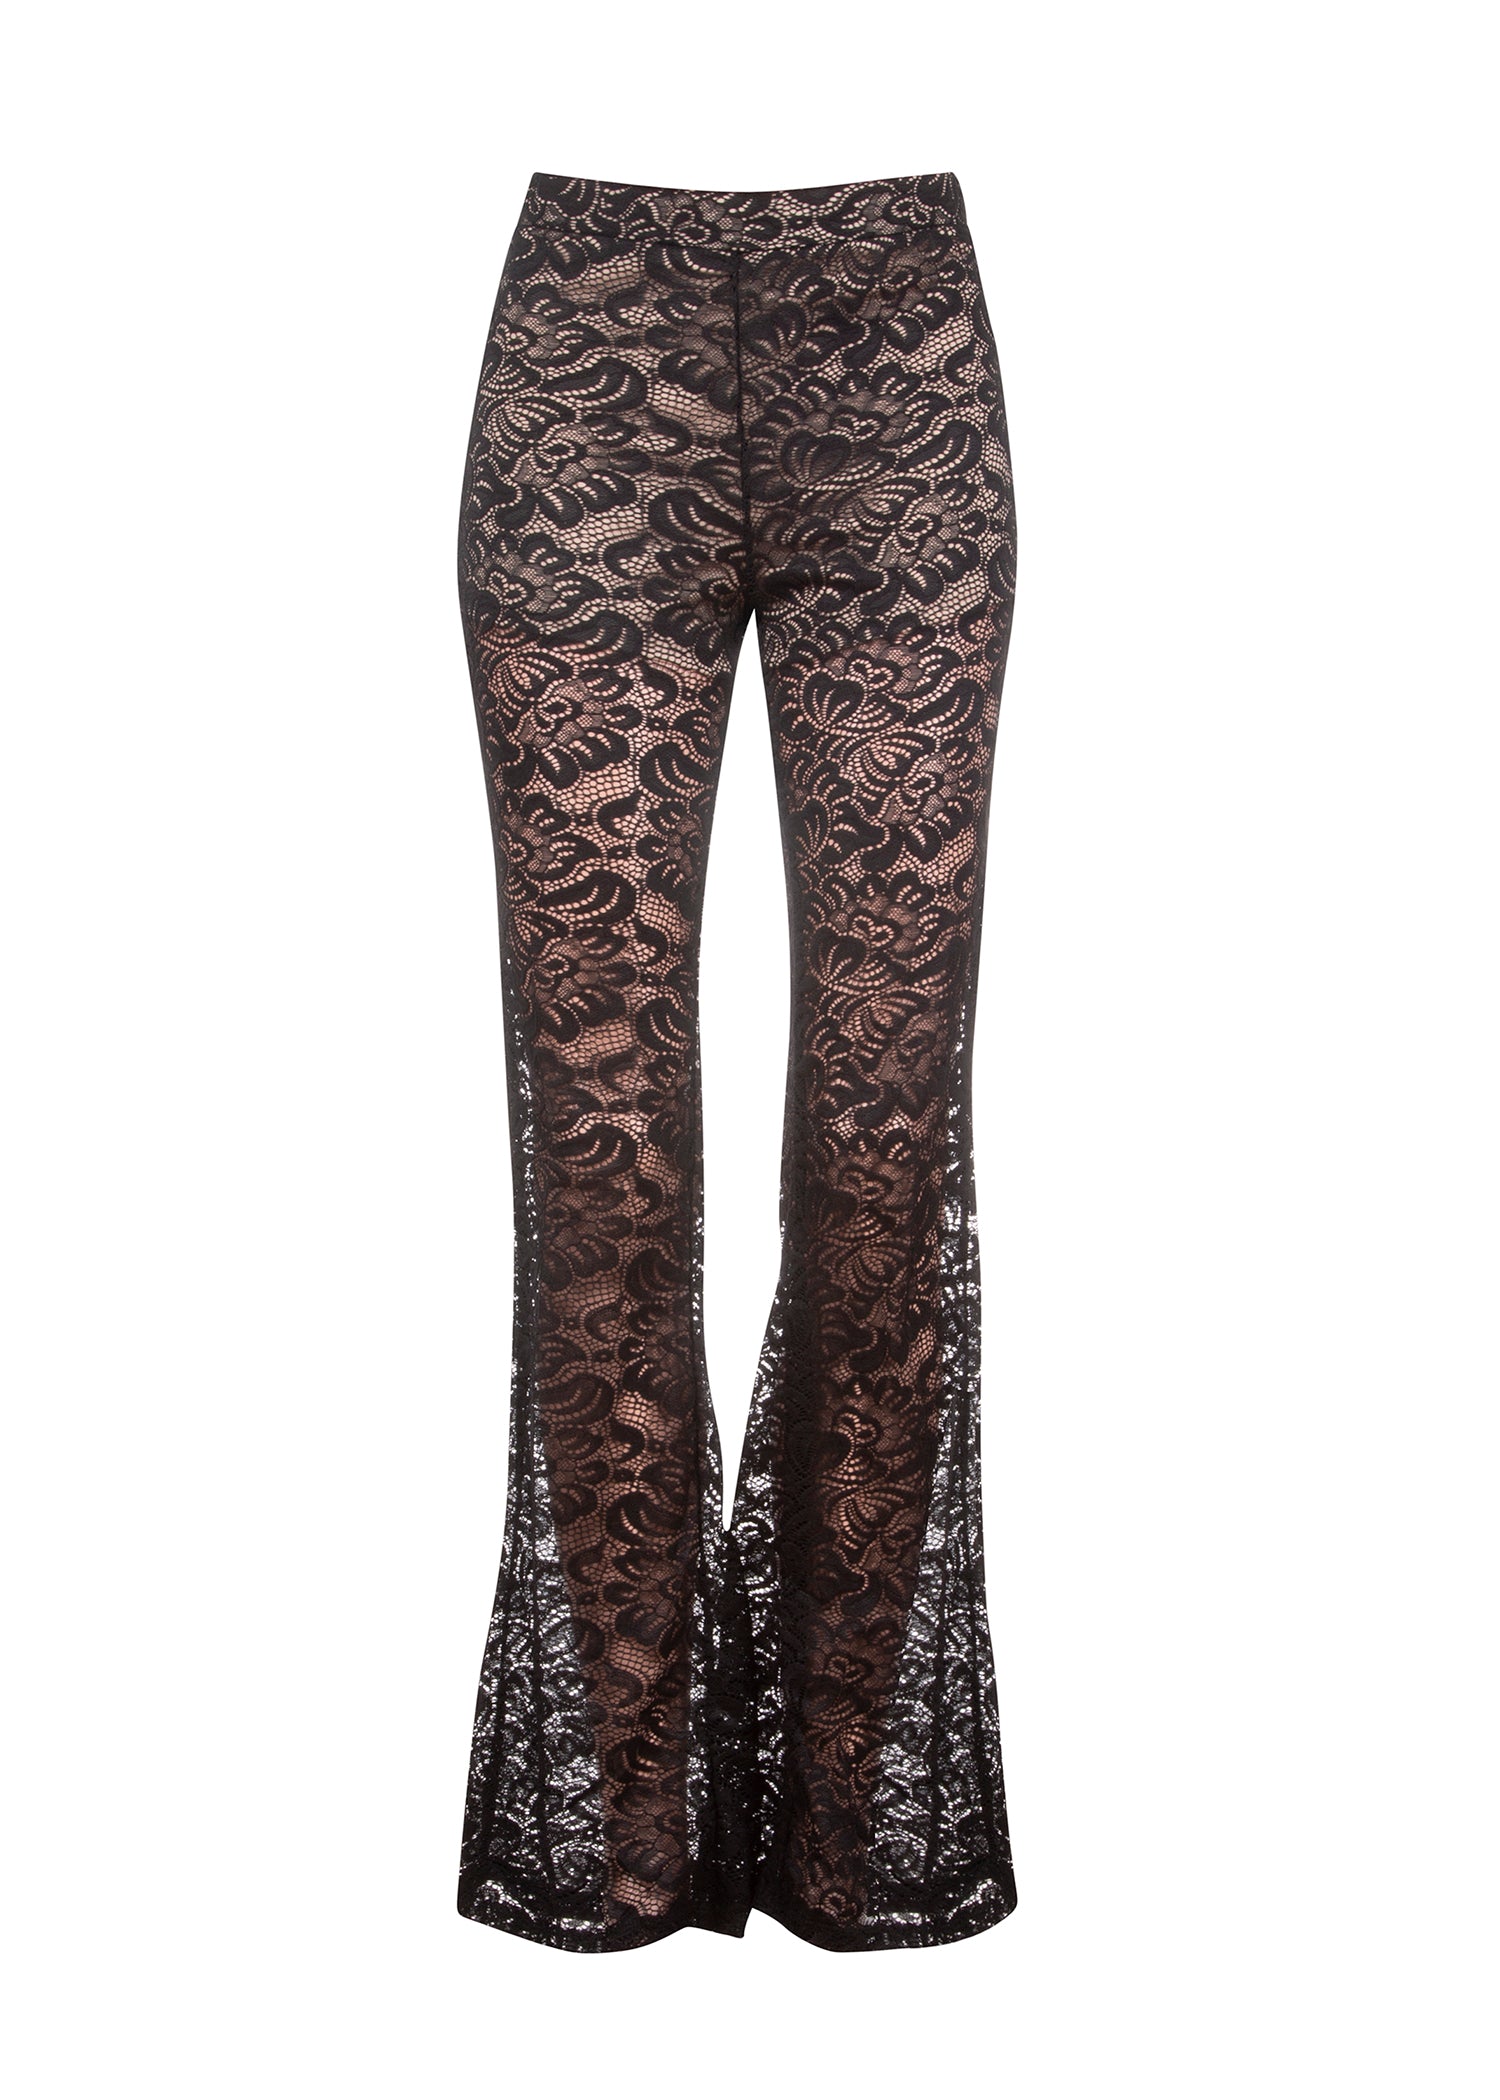 Shop Black Lace Bell Bottoms | Sheer Flare Pants | Pretty Attitude ...